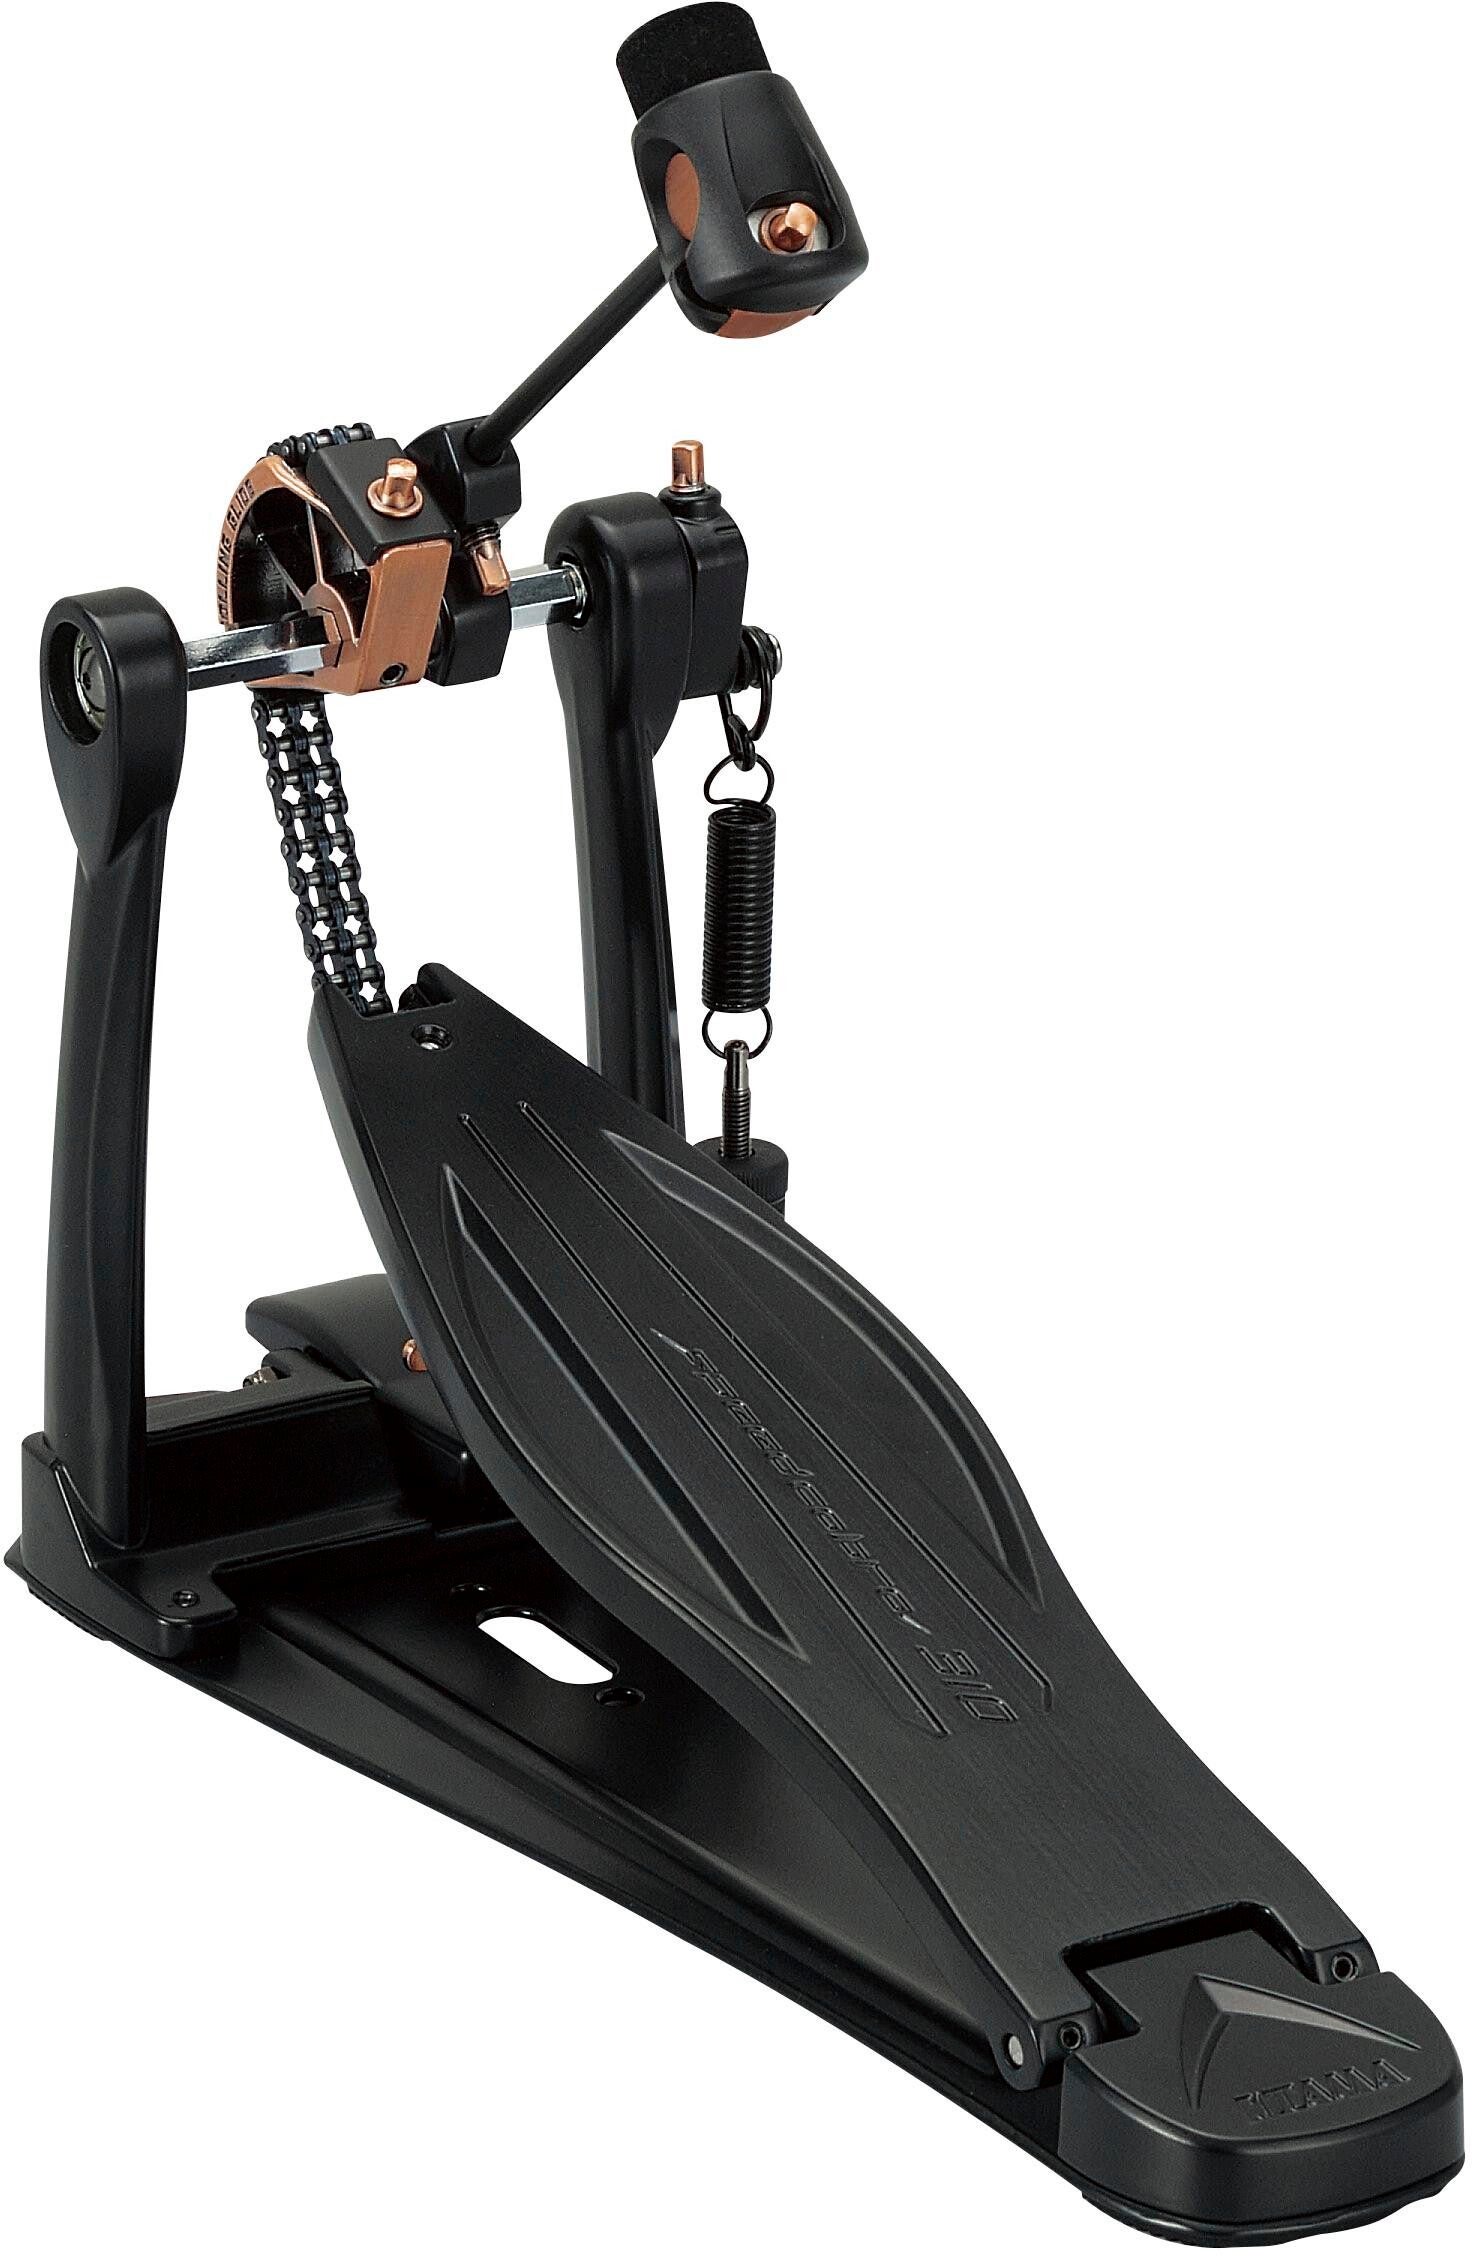 Tama HP310L Speed Cobra 310 Single Bass Drum Pedal - Black and Copper,  Limited Edition